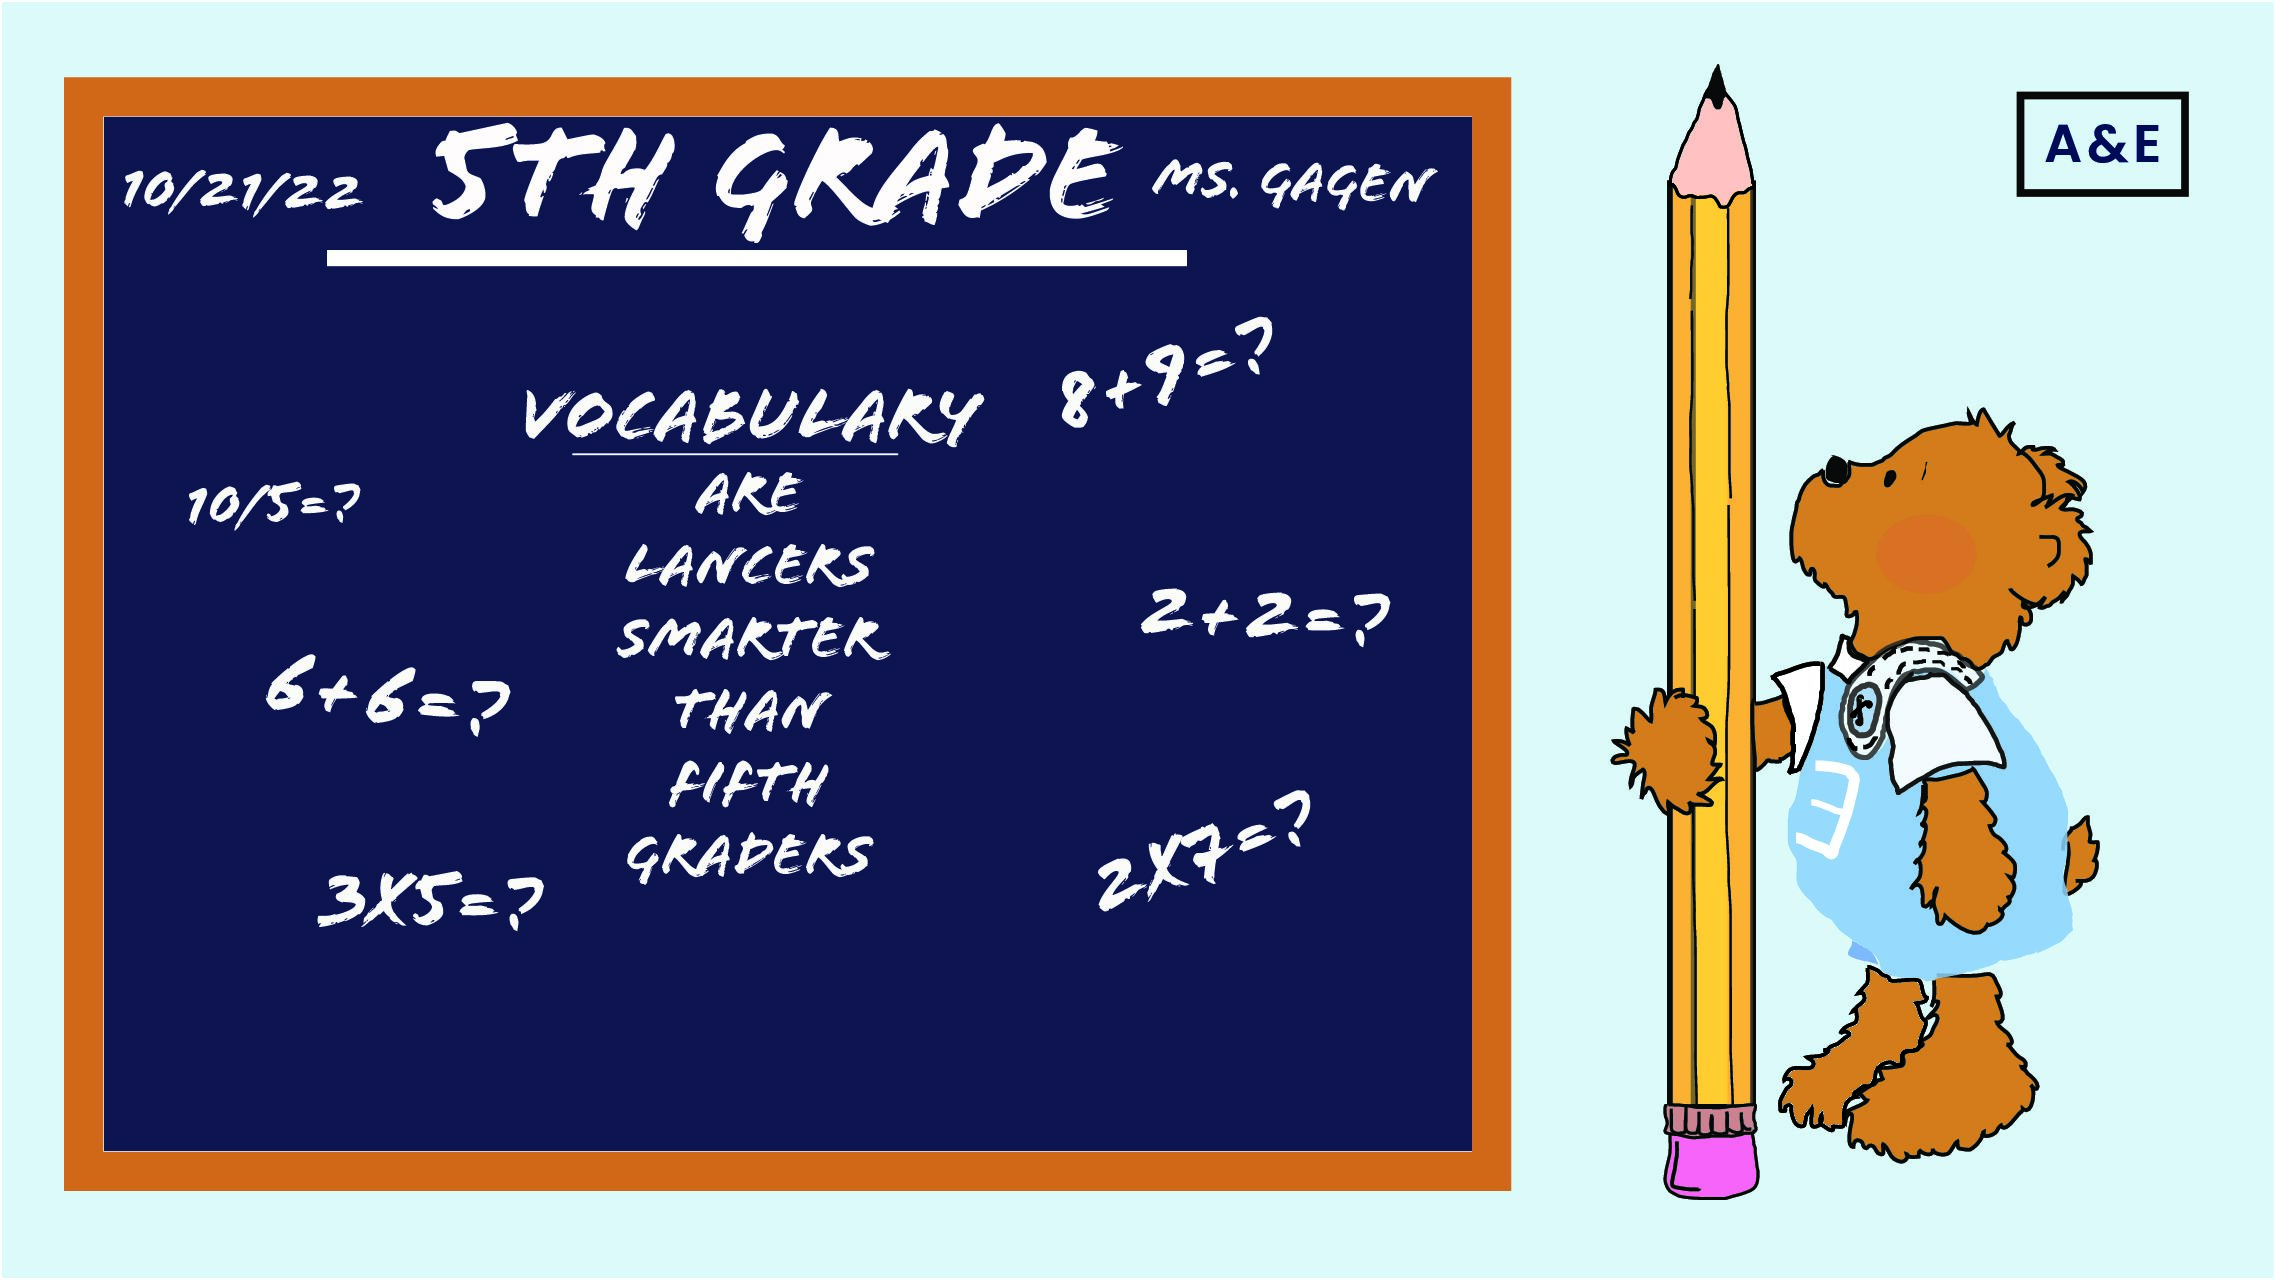 Are You Smarter Than A Fifth Grader?